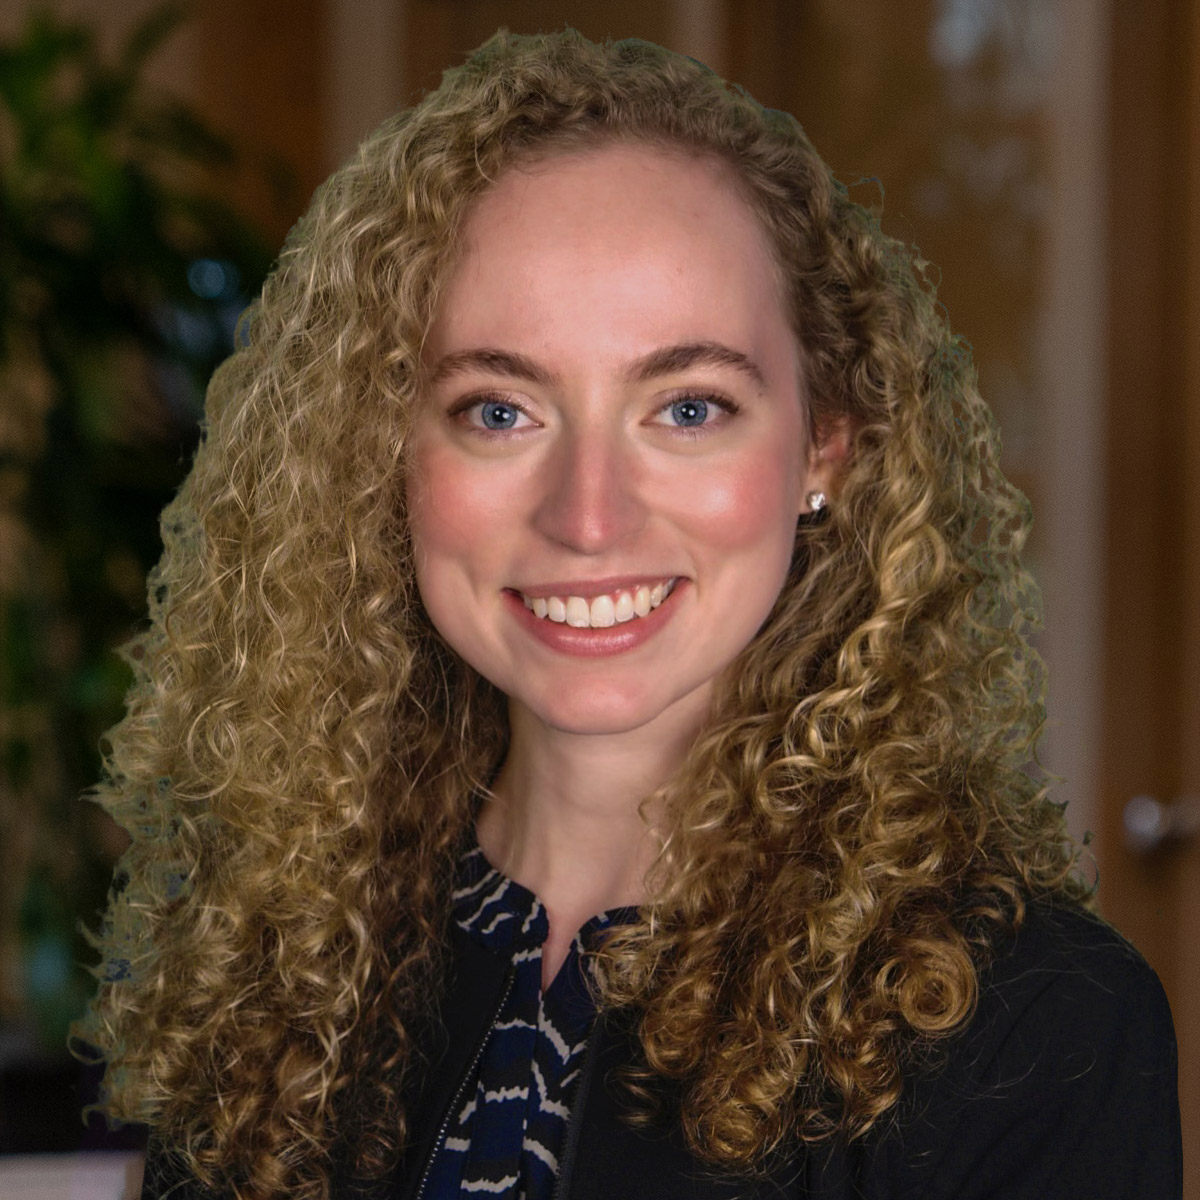 Headshot of a smiling young woman with blonde, curly hair dressed in corporate attire in front of a blurred background